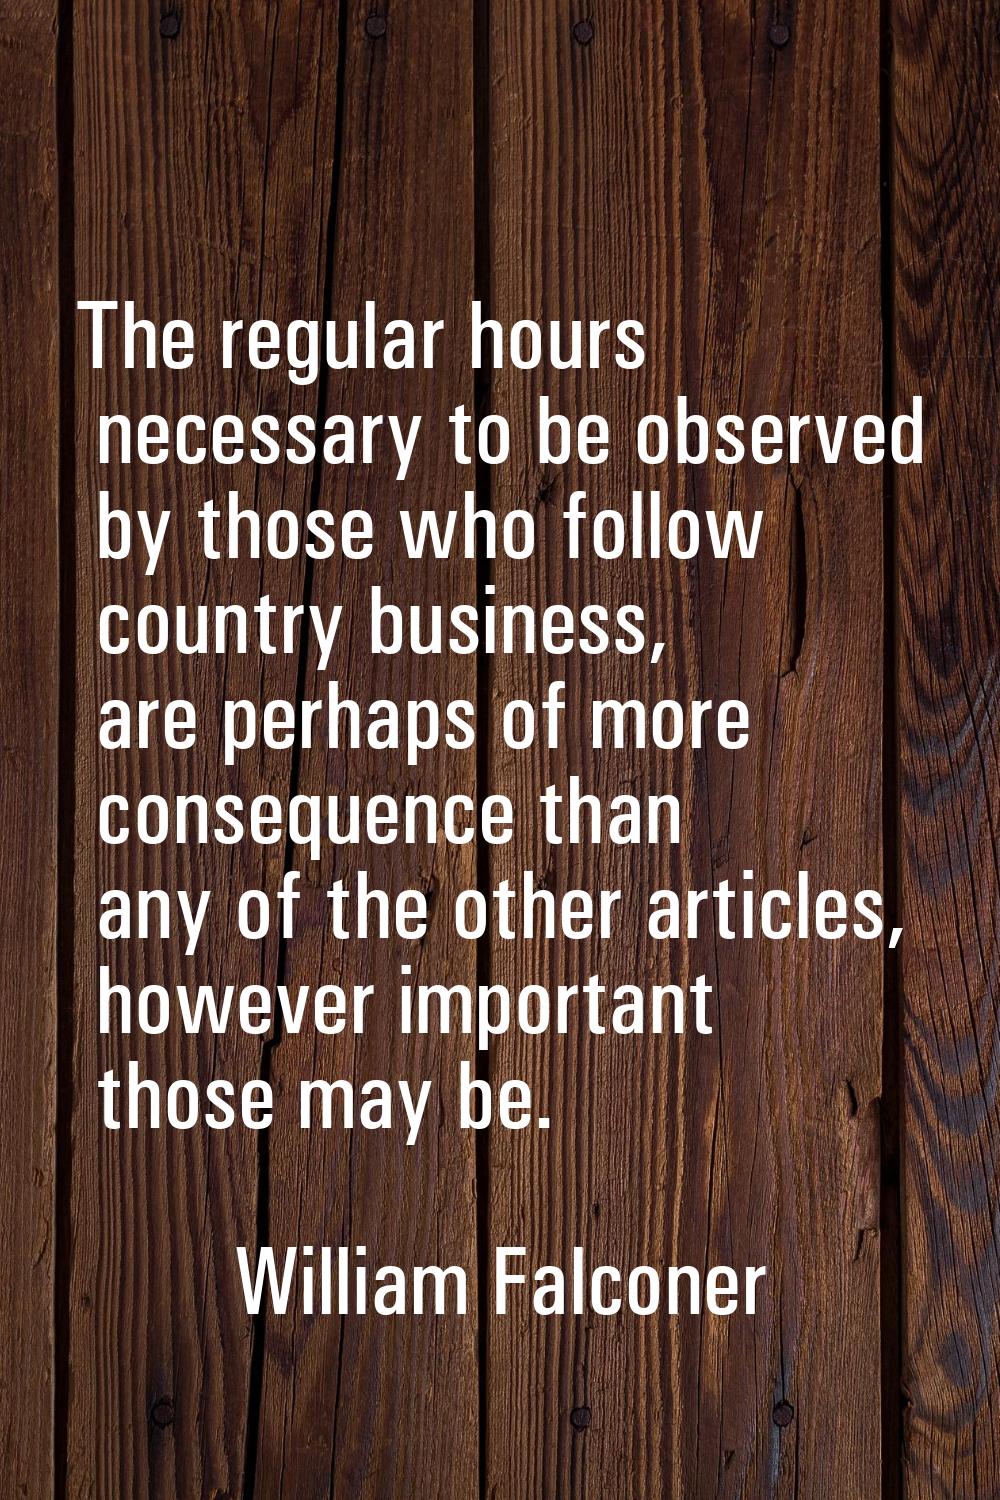 The regular hours necessary to be observed by those who follow country business, are perhaps of mor